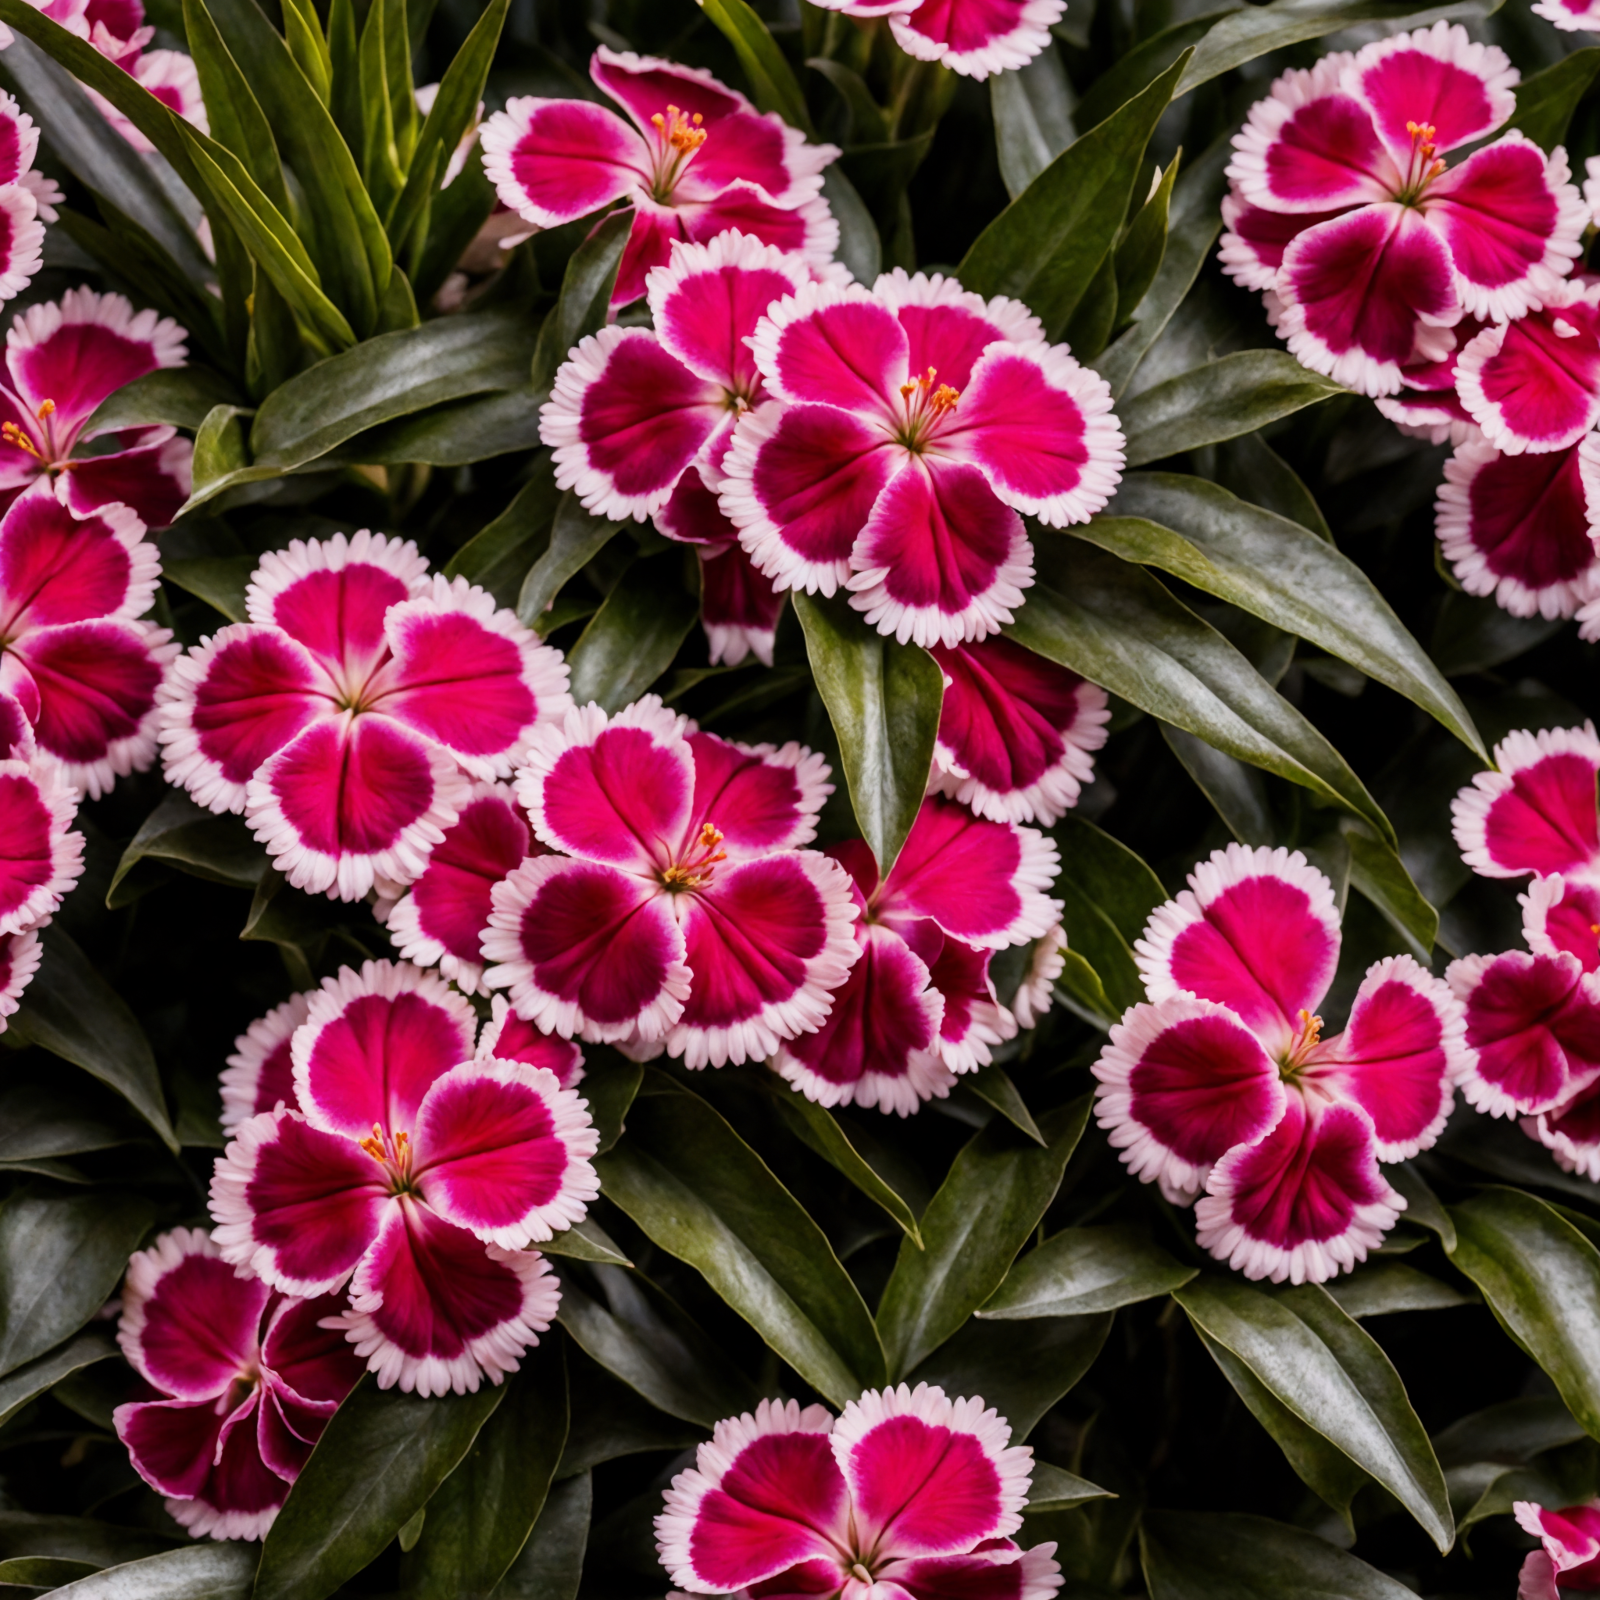 Vibrant pink Dianthus barbatus flowers in a planter, with clear lighting against a dark background.